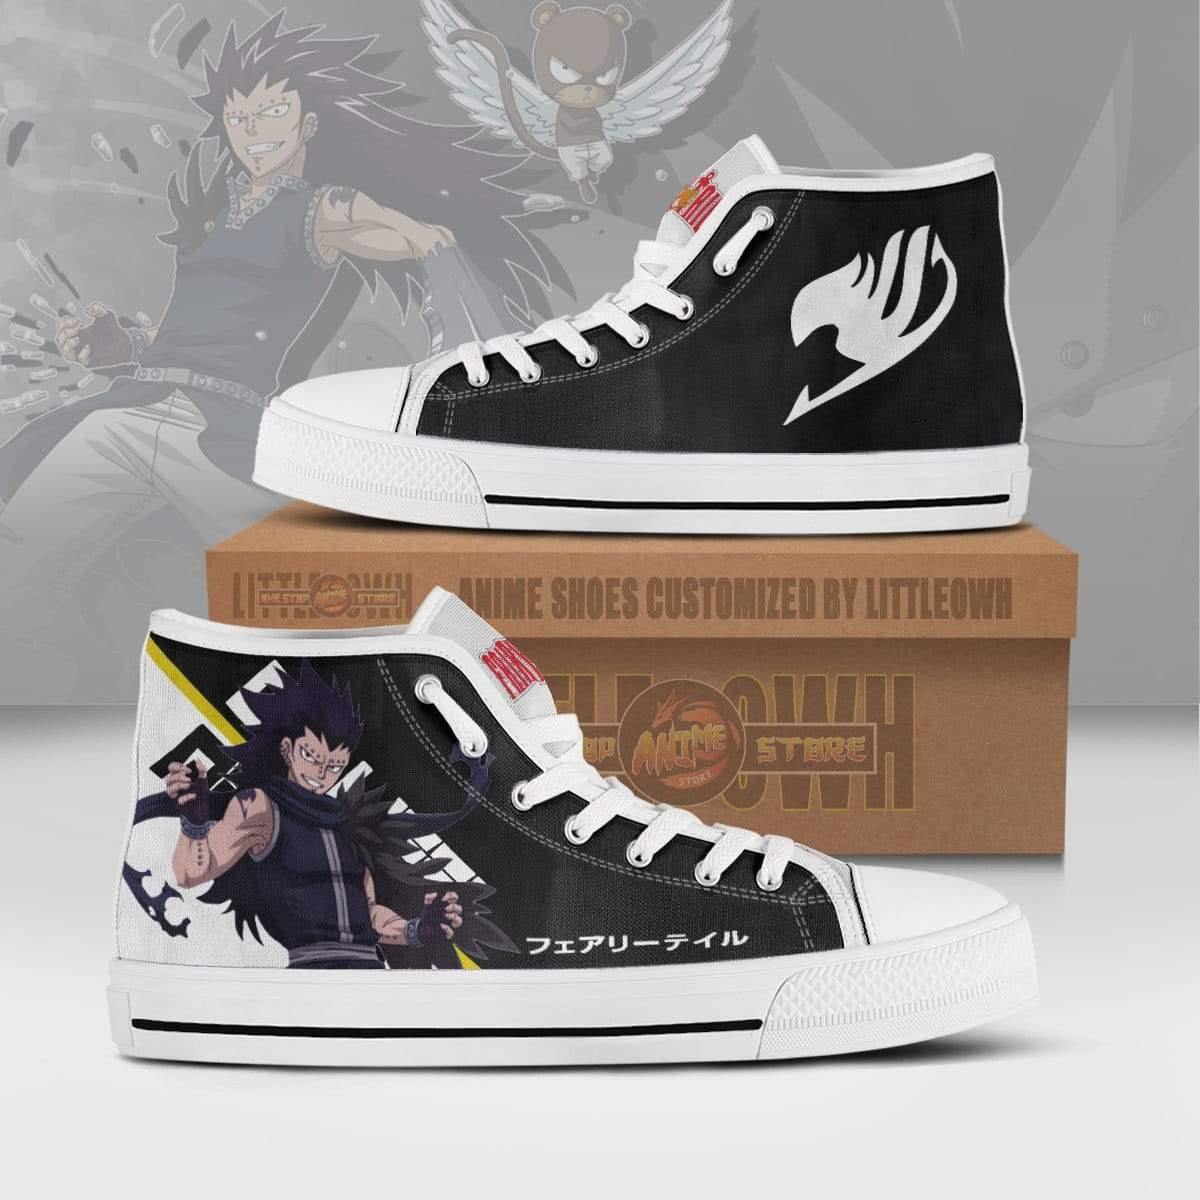 Gajeel Redfox High Top Canvas Shoes Custom Fairy Tail Anime Sneakers